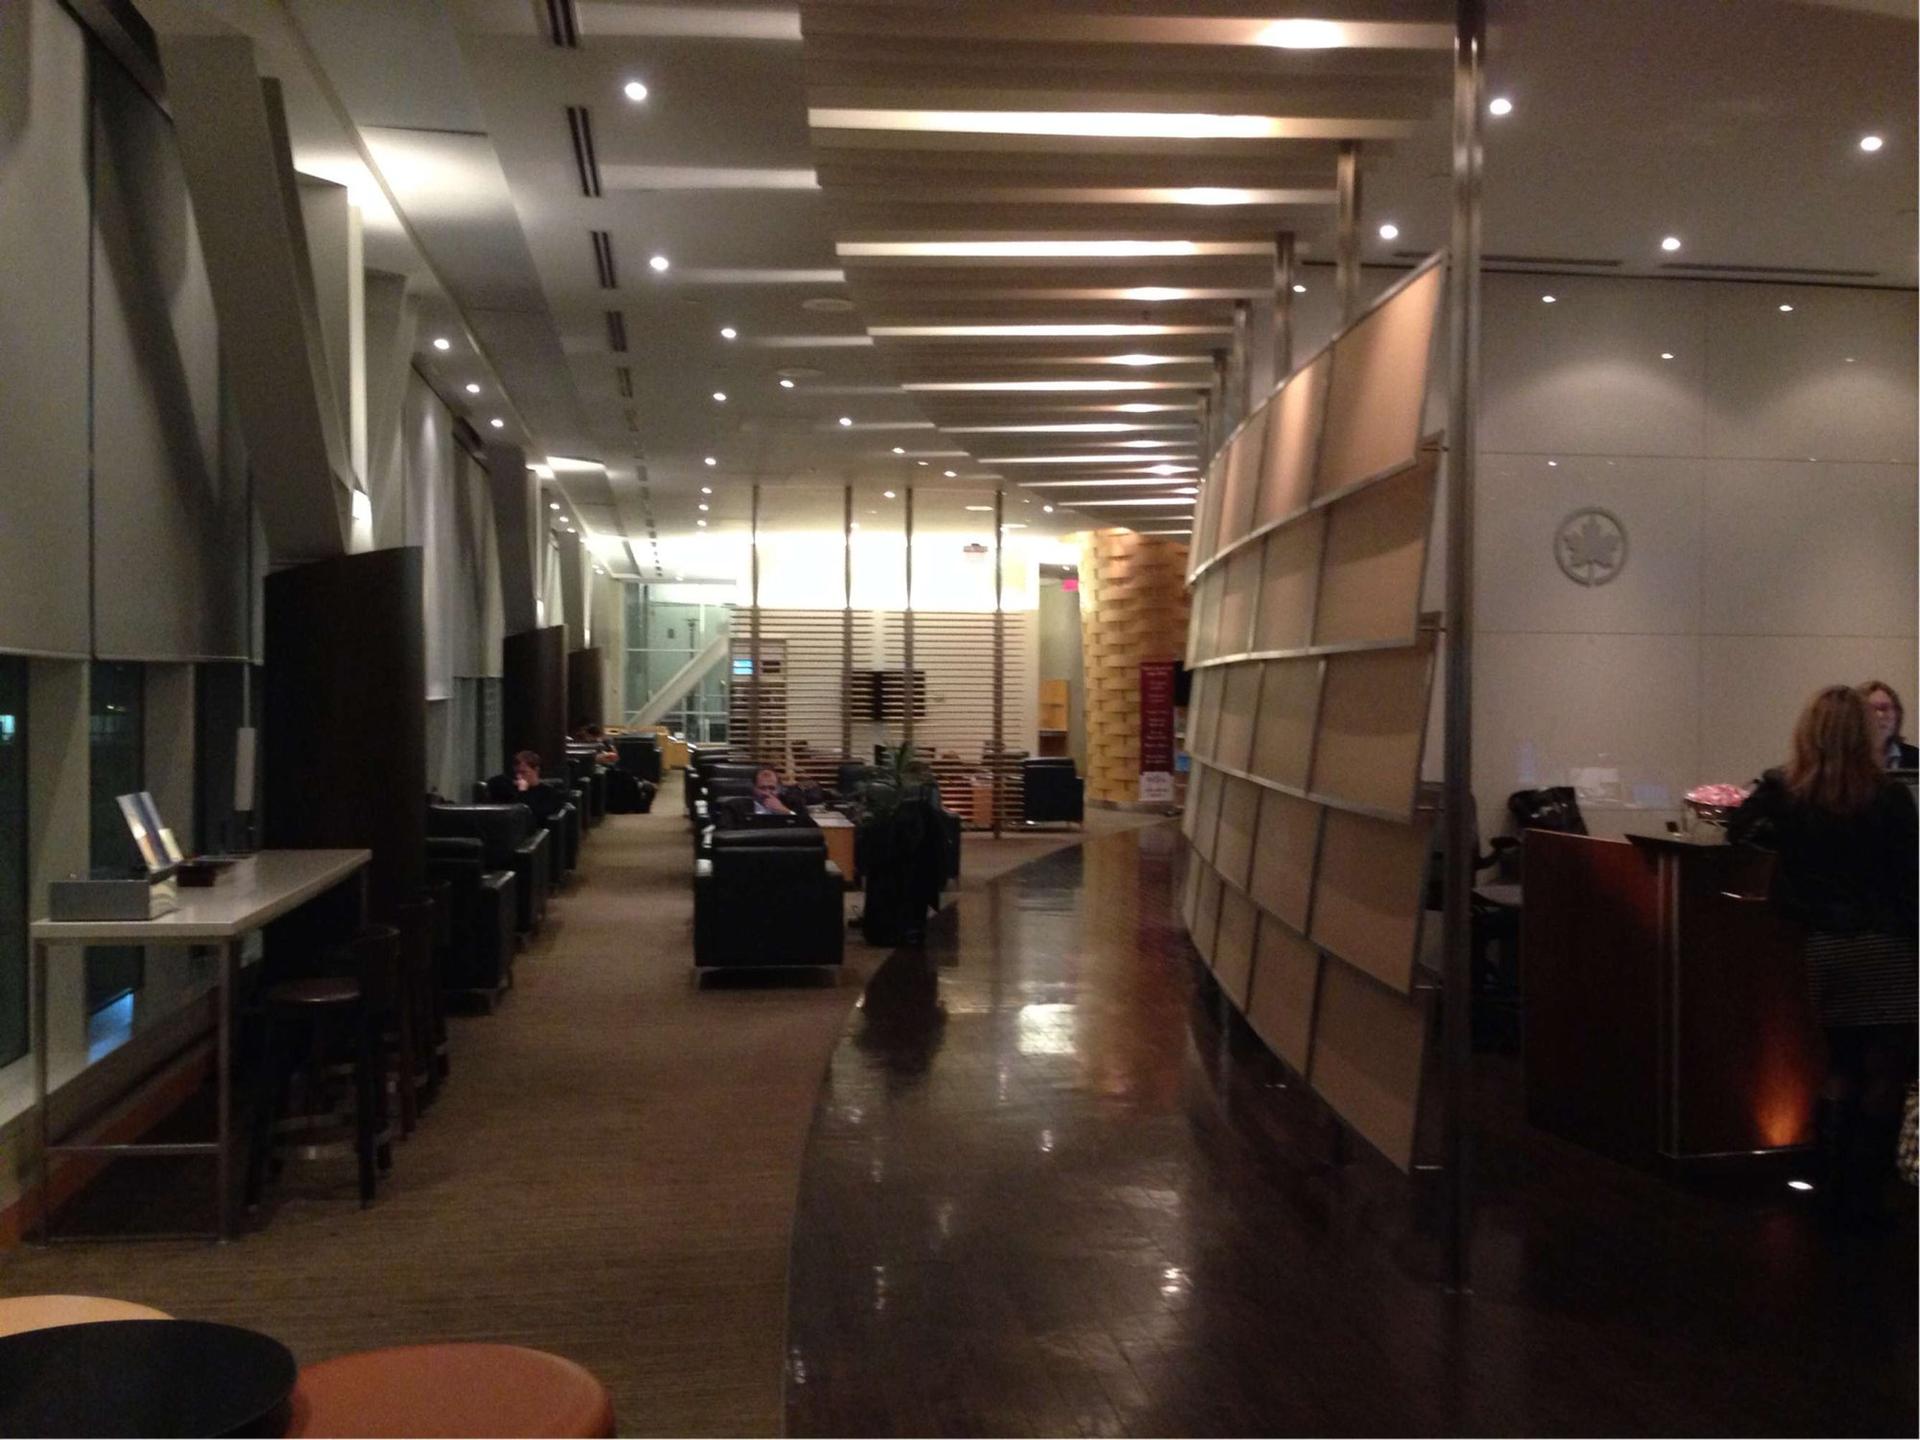 Air Canada Maple Leaf Lounge image 10 of 17